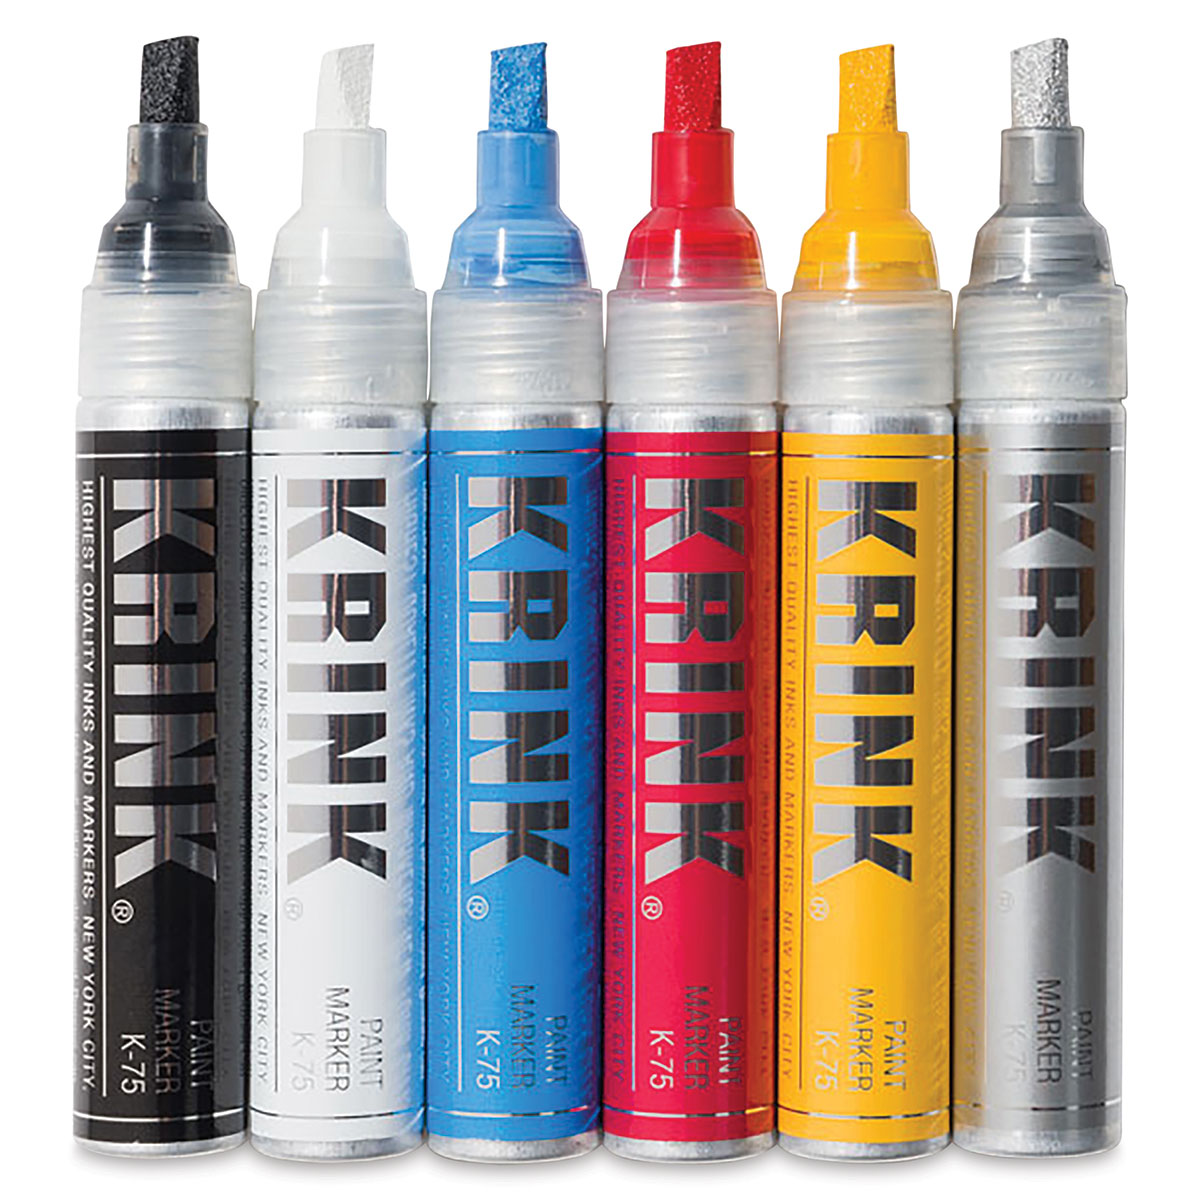 Krink K-11 Acrylic Paint Markers